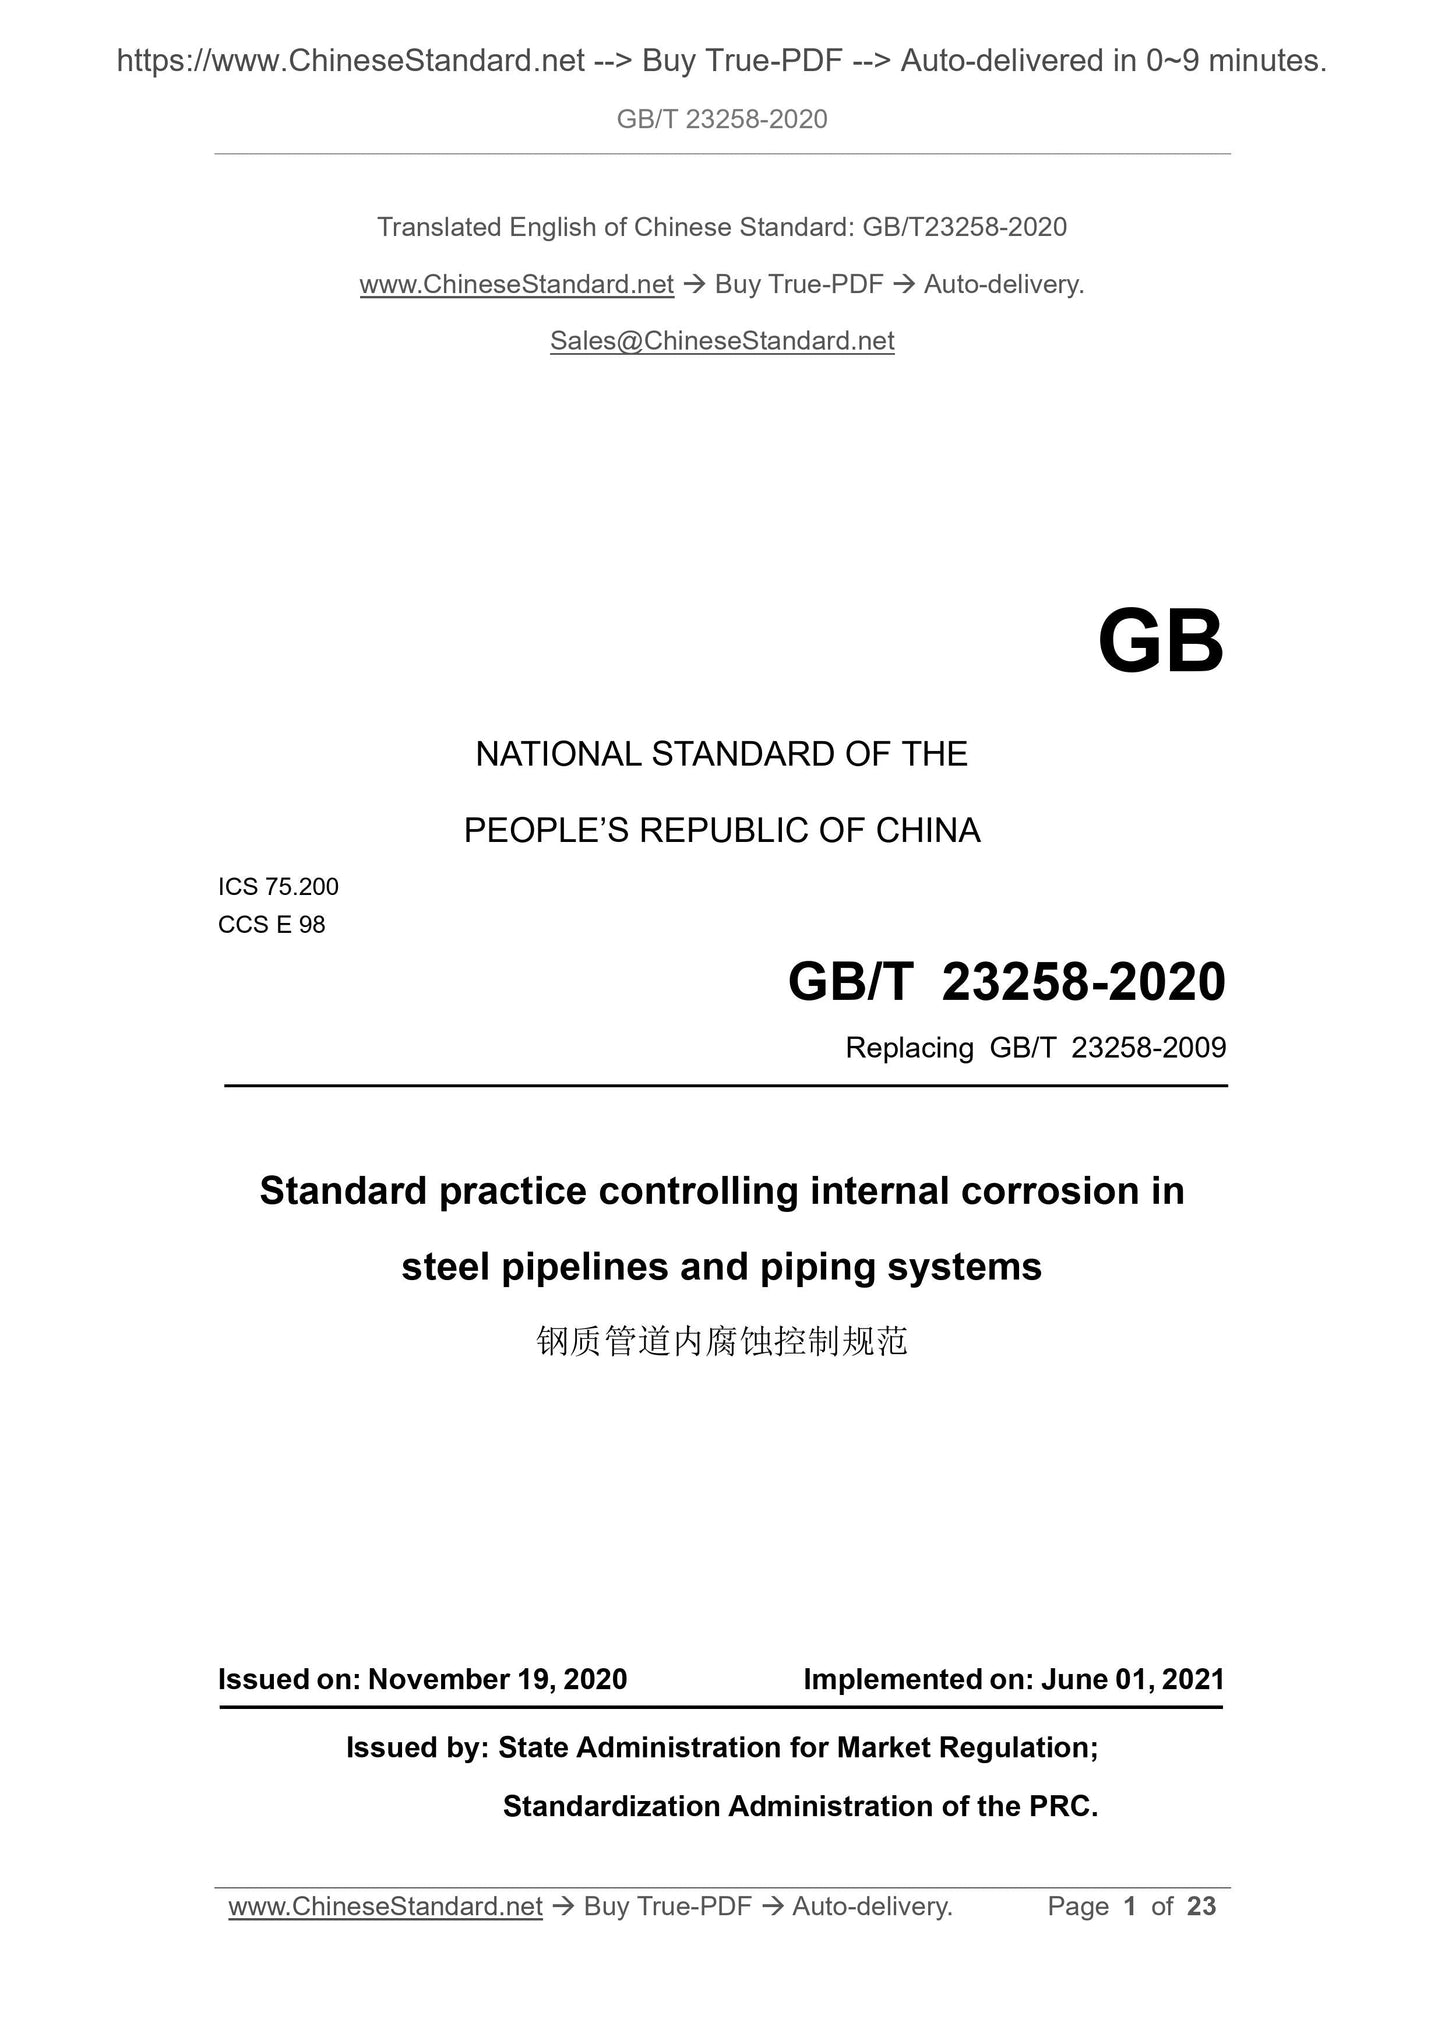 GB/T 23258-2020 Page 1